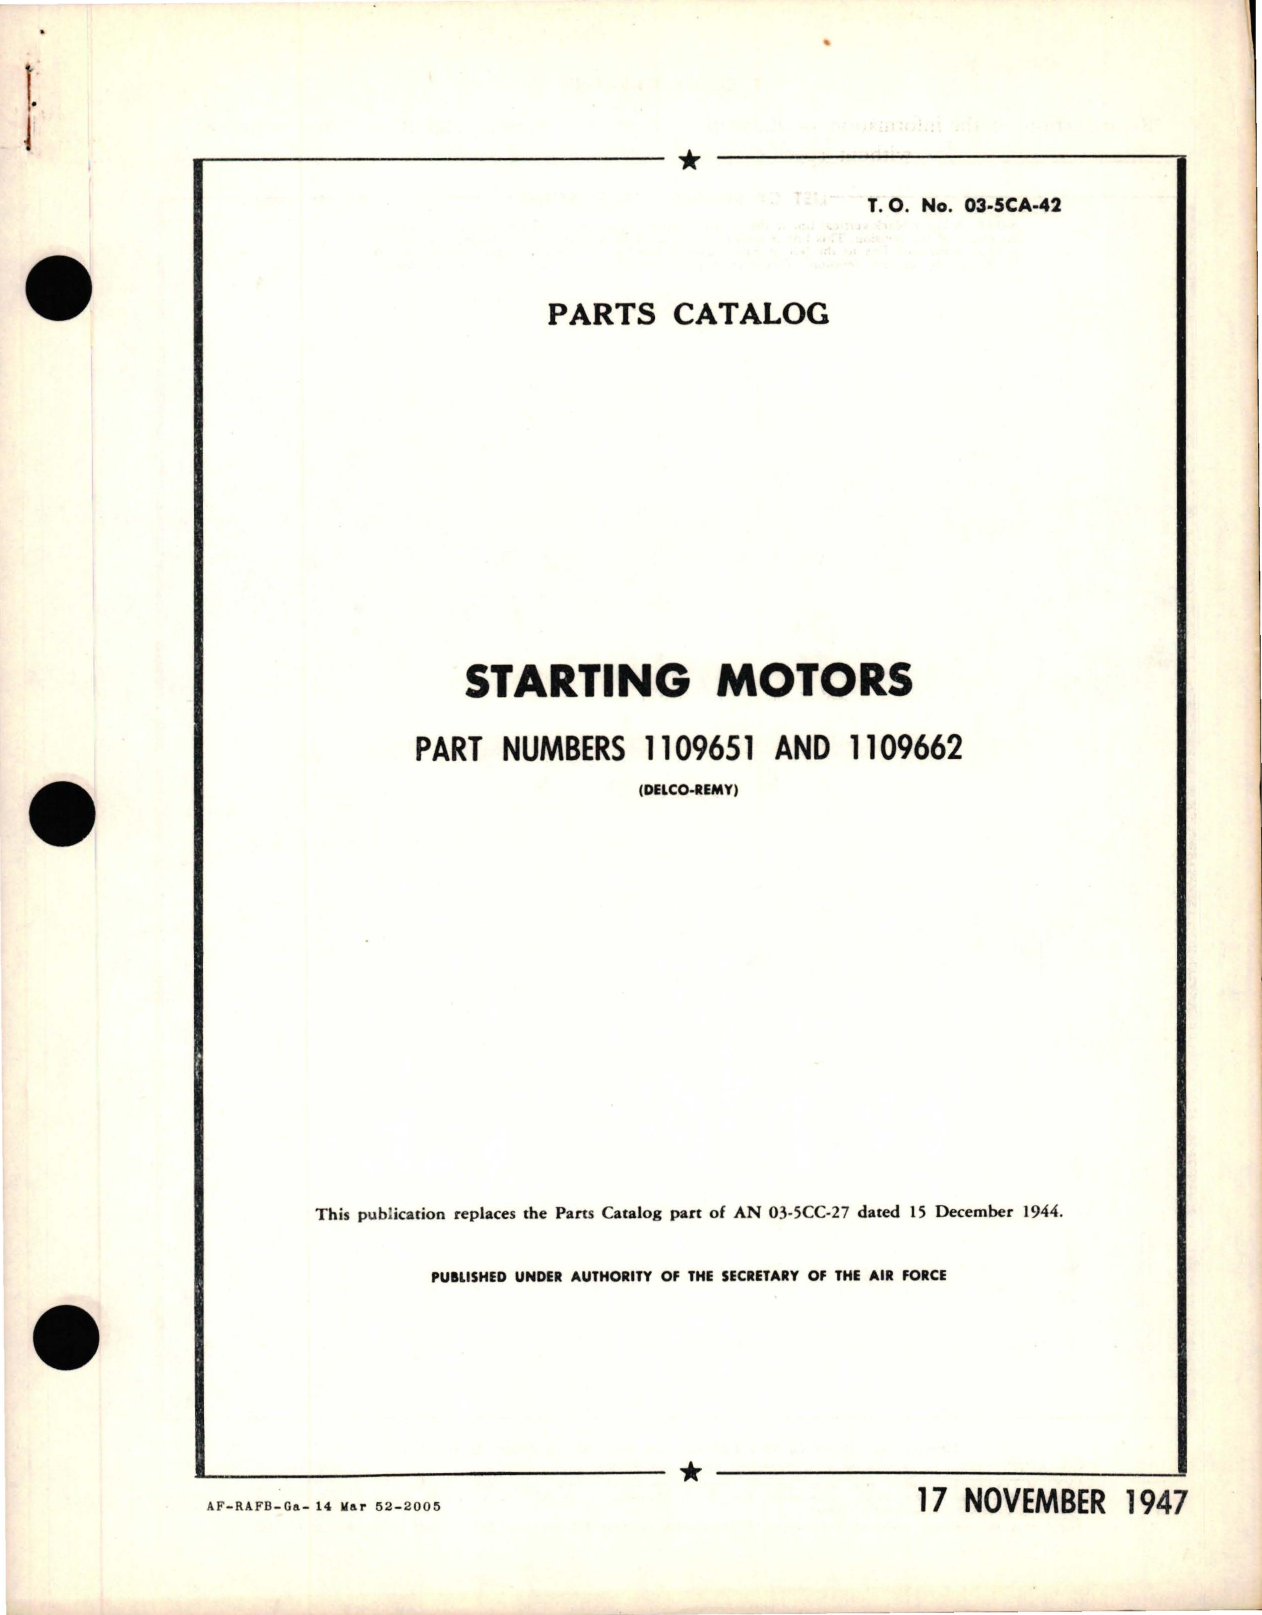 Sample page 1 from AirCorps Library document: Parts Catalog for Starting Motors - Parts 1109651 and 1109662